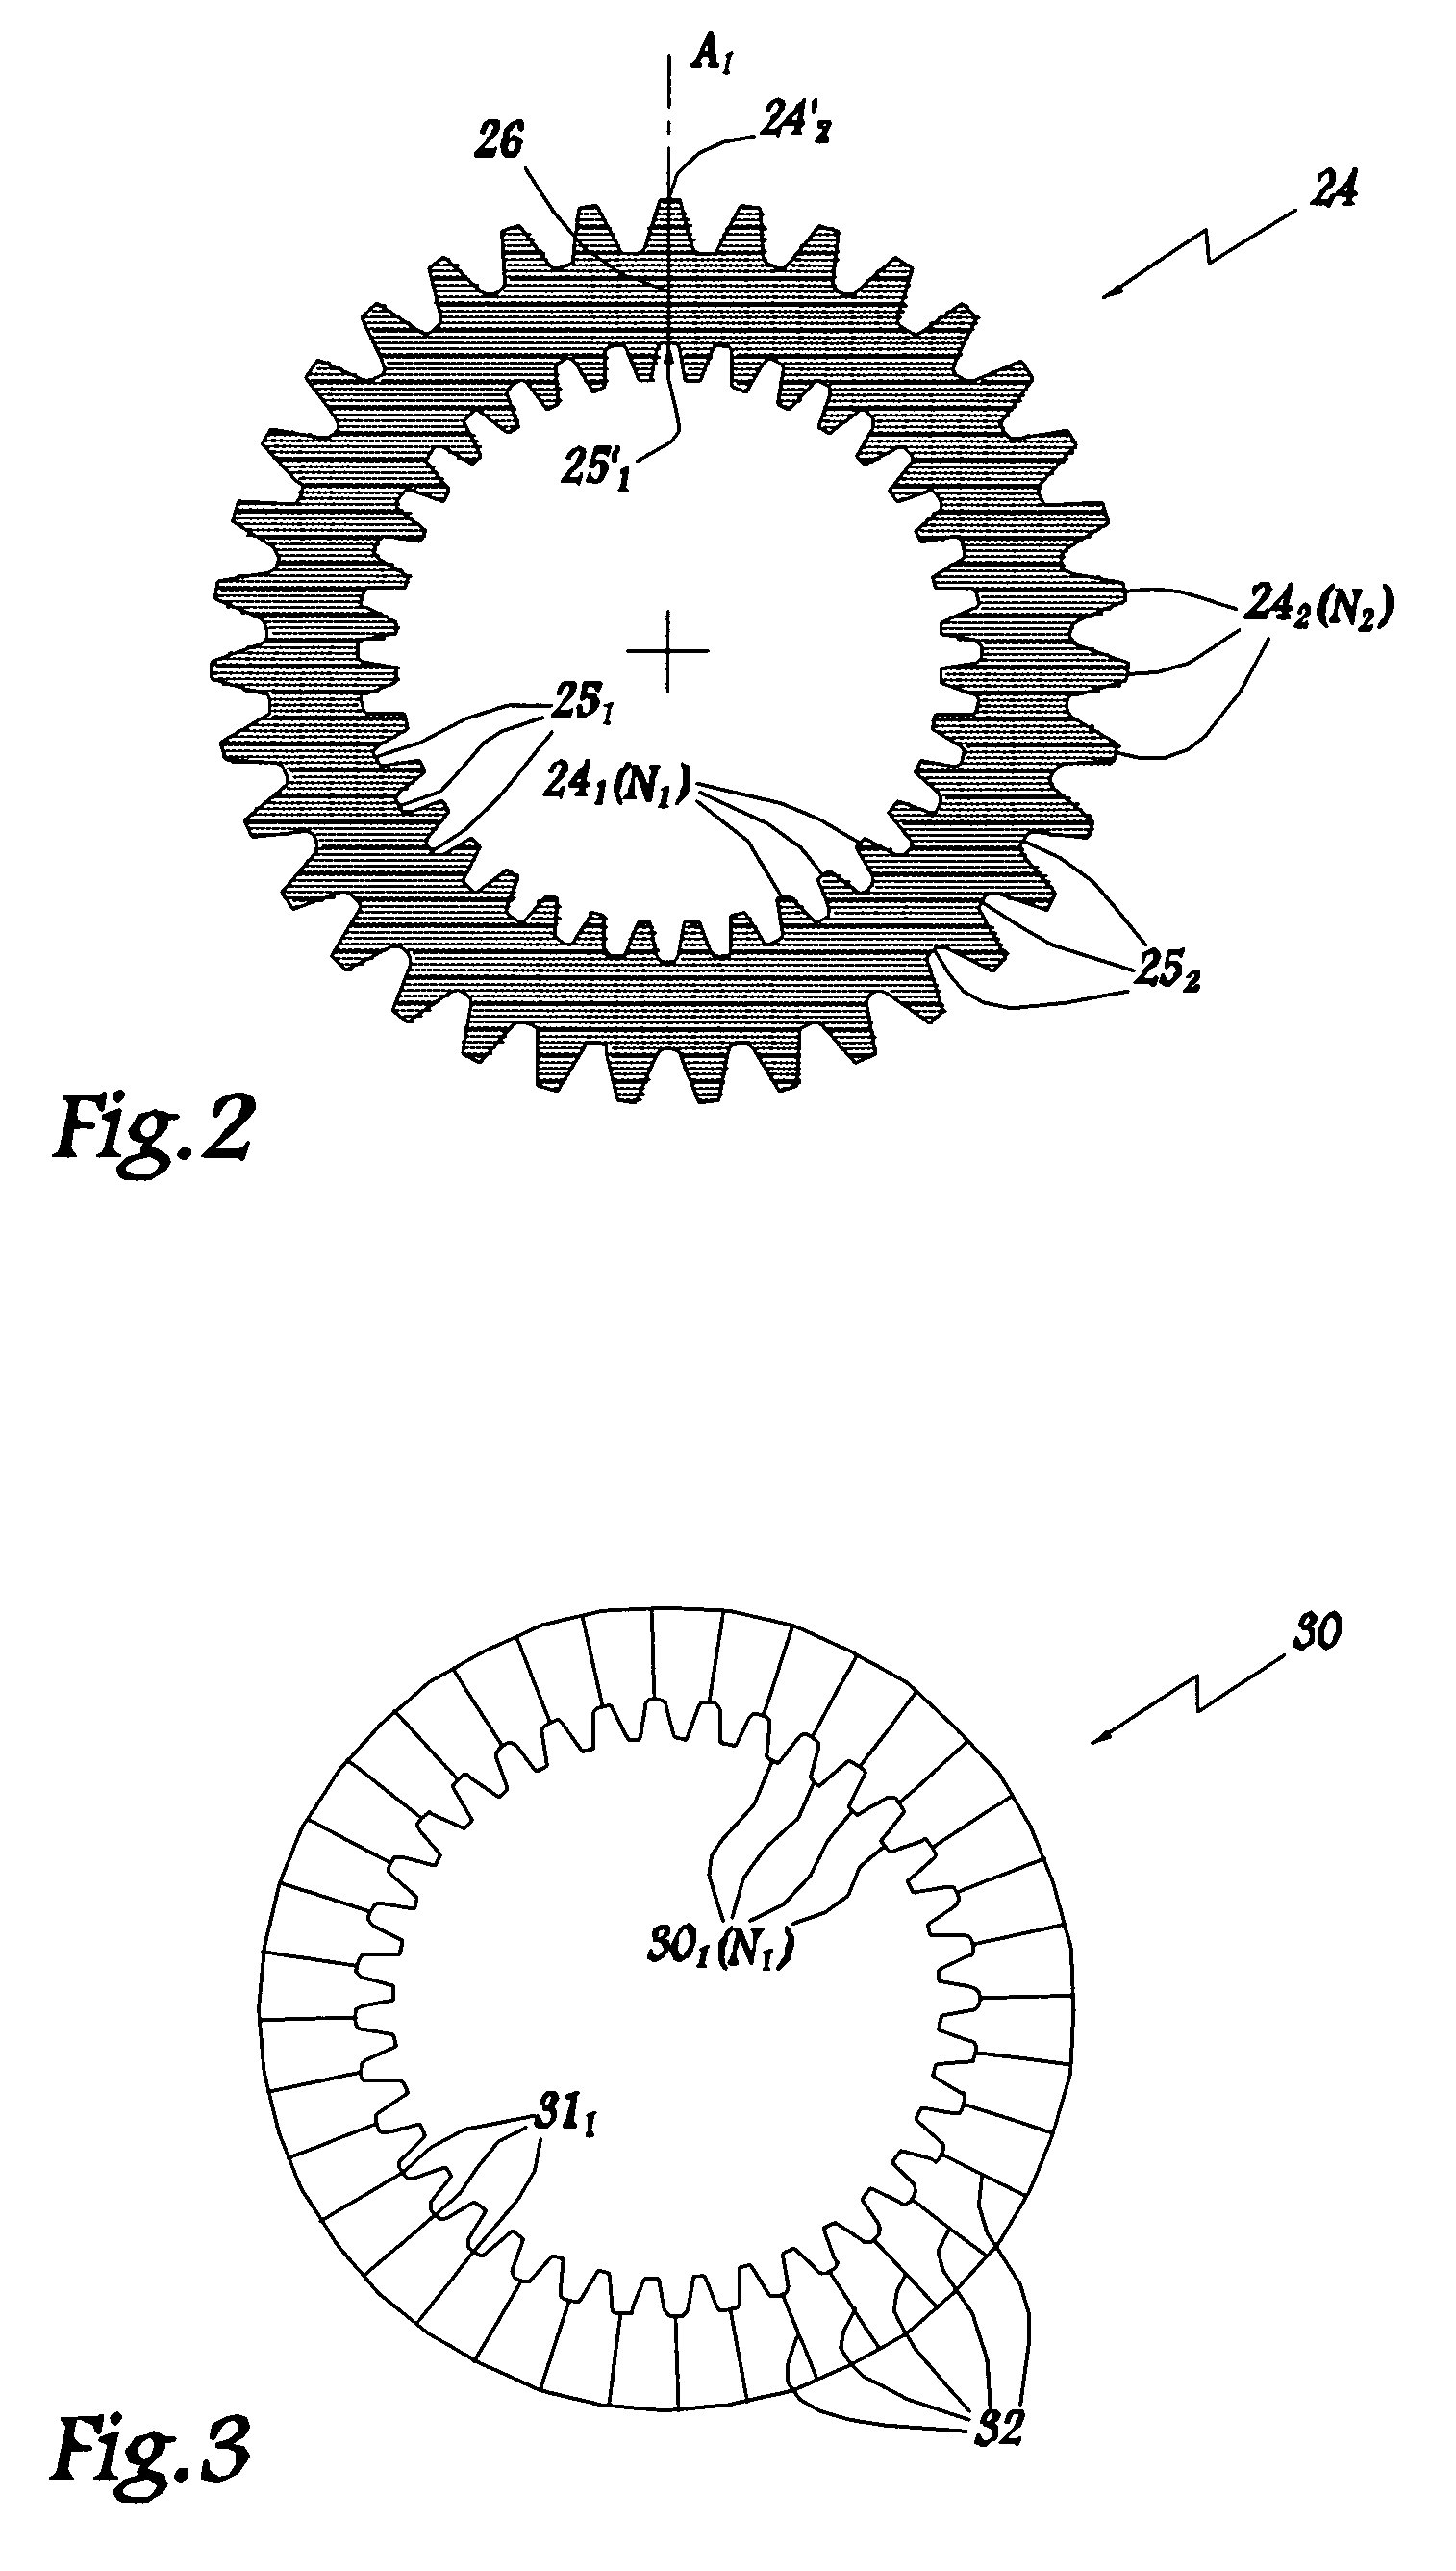 Circuit breaker comprising a control assembly and interrupting chamber and method of assembly